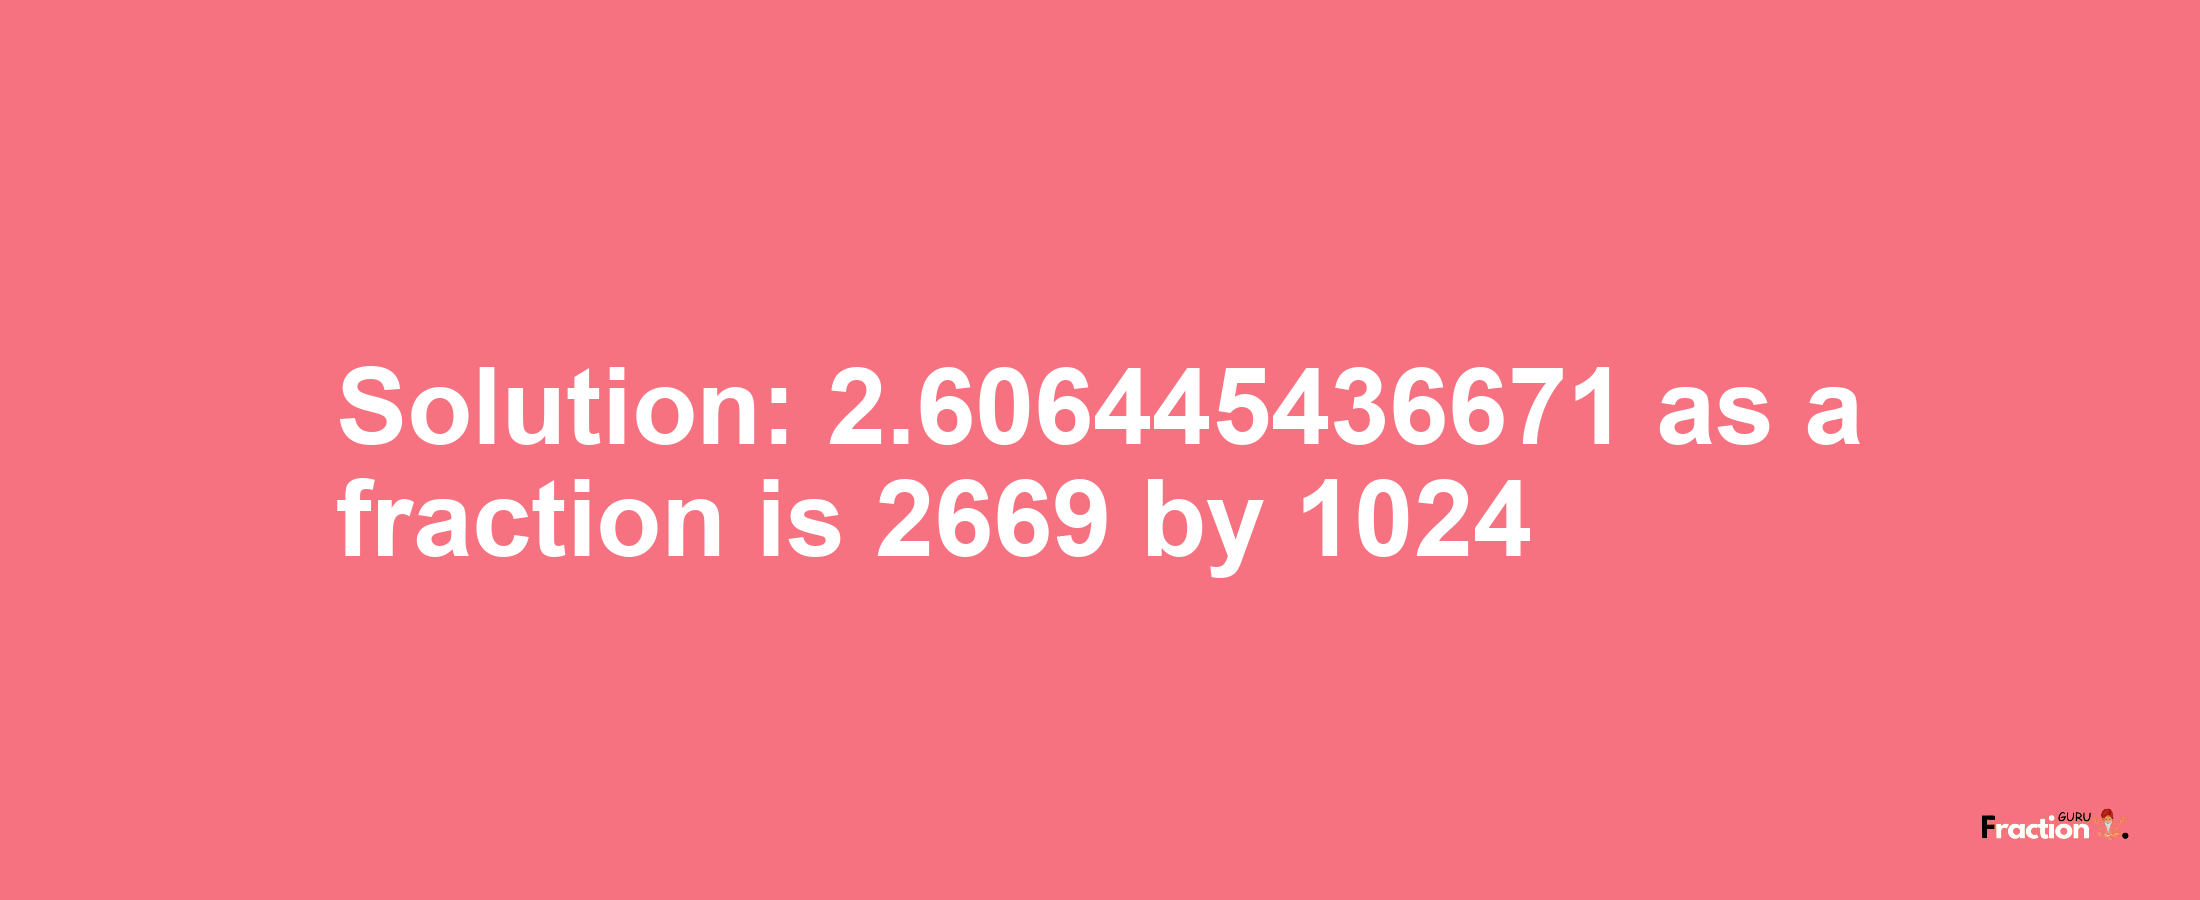 Solution:2.606445436671 as a fraction is 2669/1024